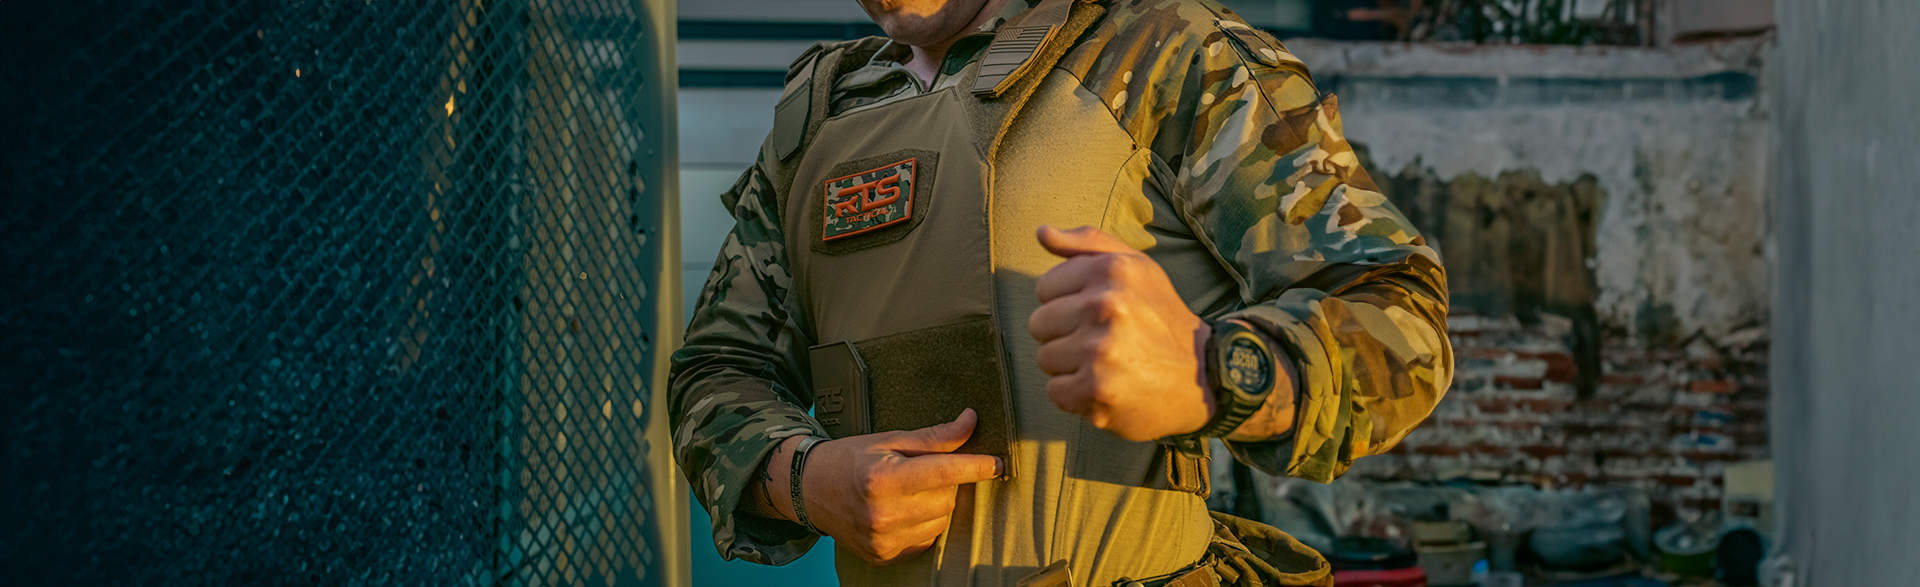 COVERT CONCEALABLE PLATE CARRIER